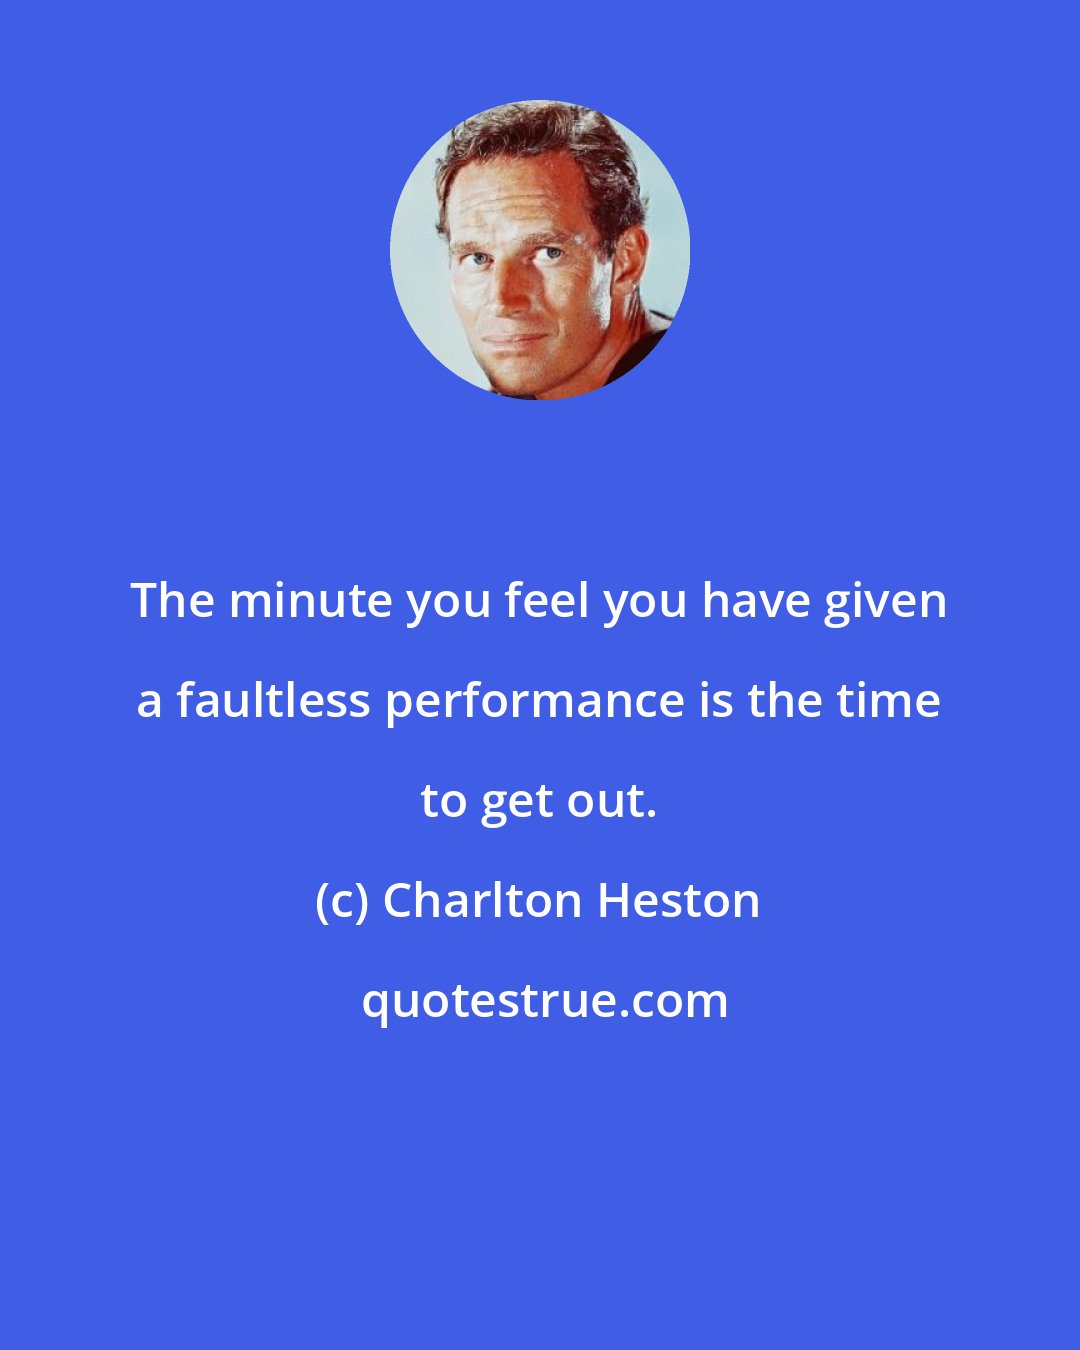 Charlton Heston: The minute you feel you have given a faultless performance is the time to get out.